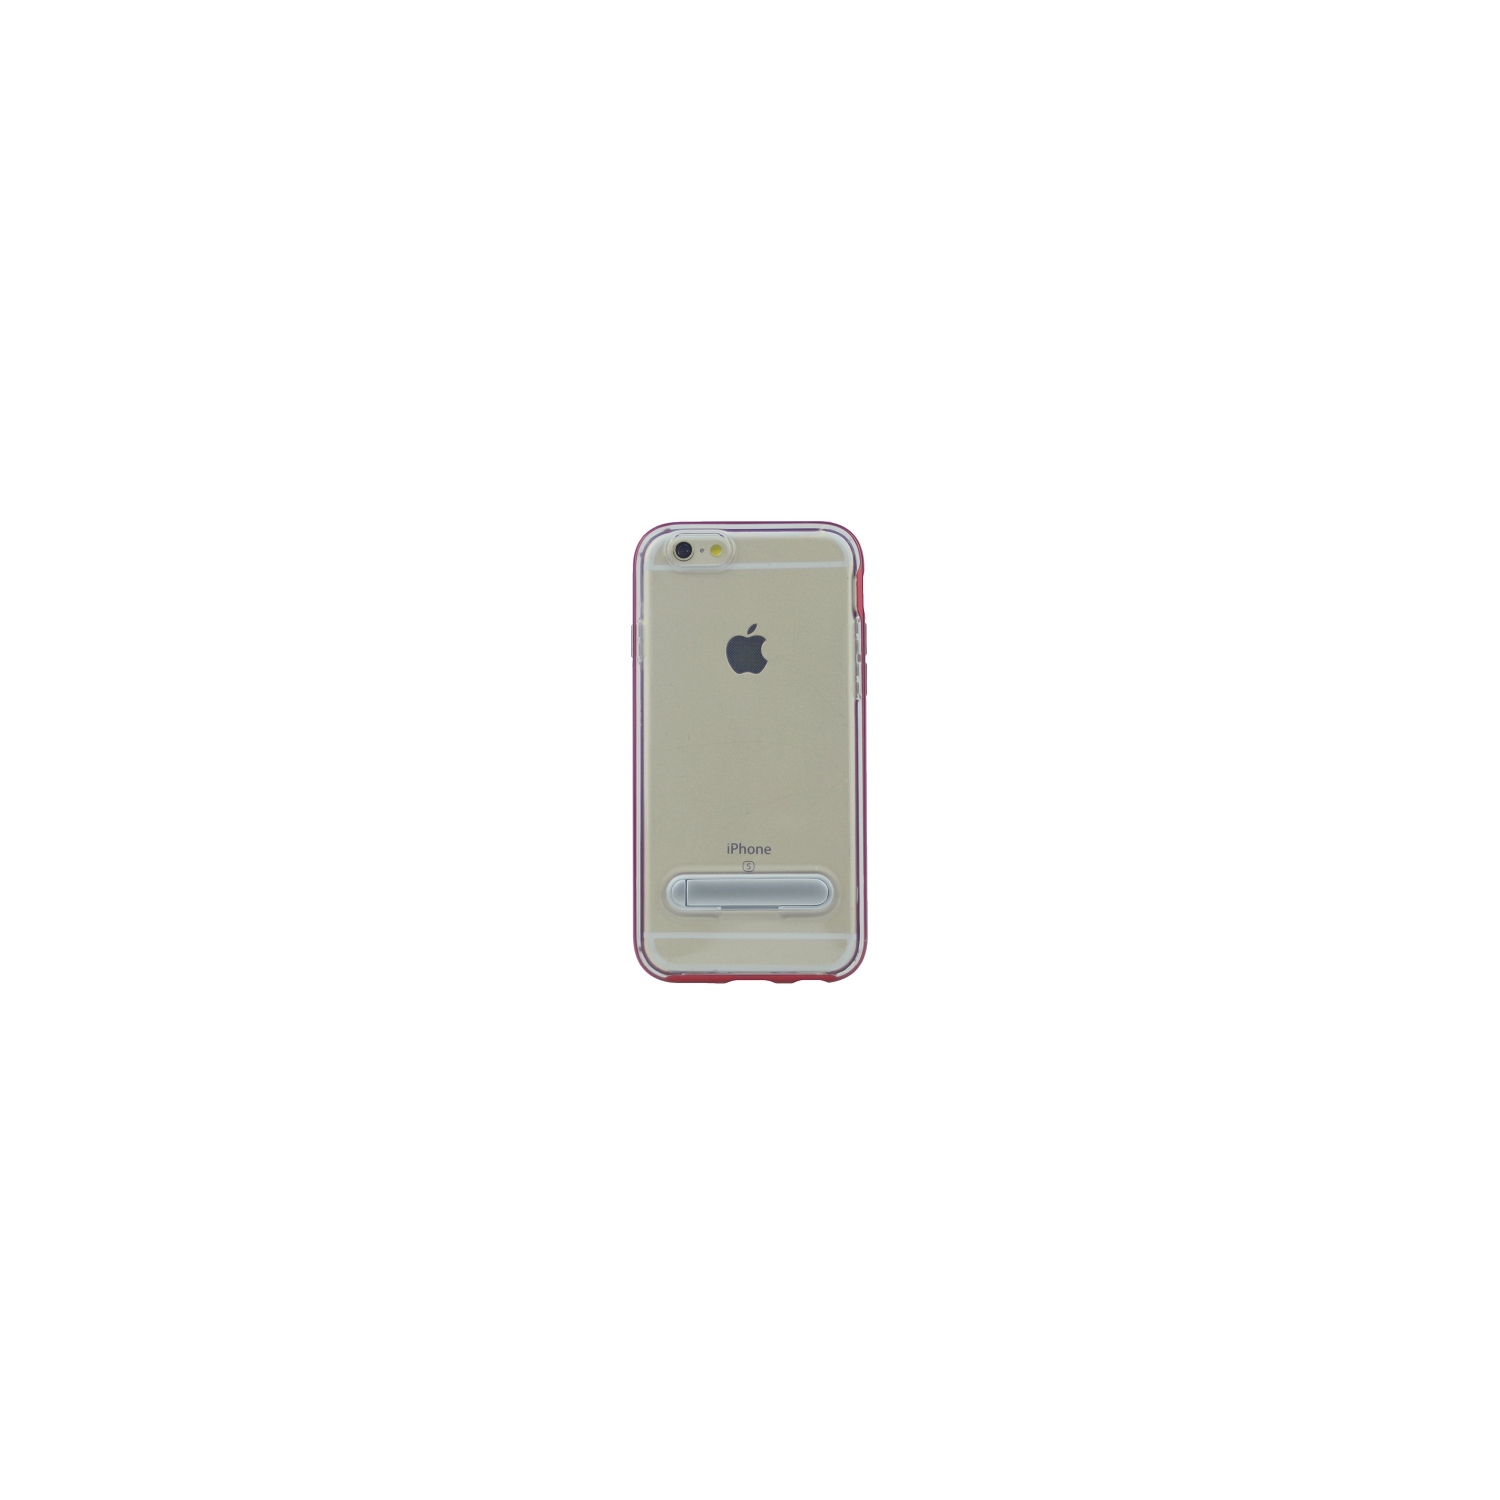 No Package will be included Slim clear tpu+hard frame rubber bumper for Iphone 5/S/SE(2016) with kickstand, Red